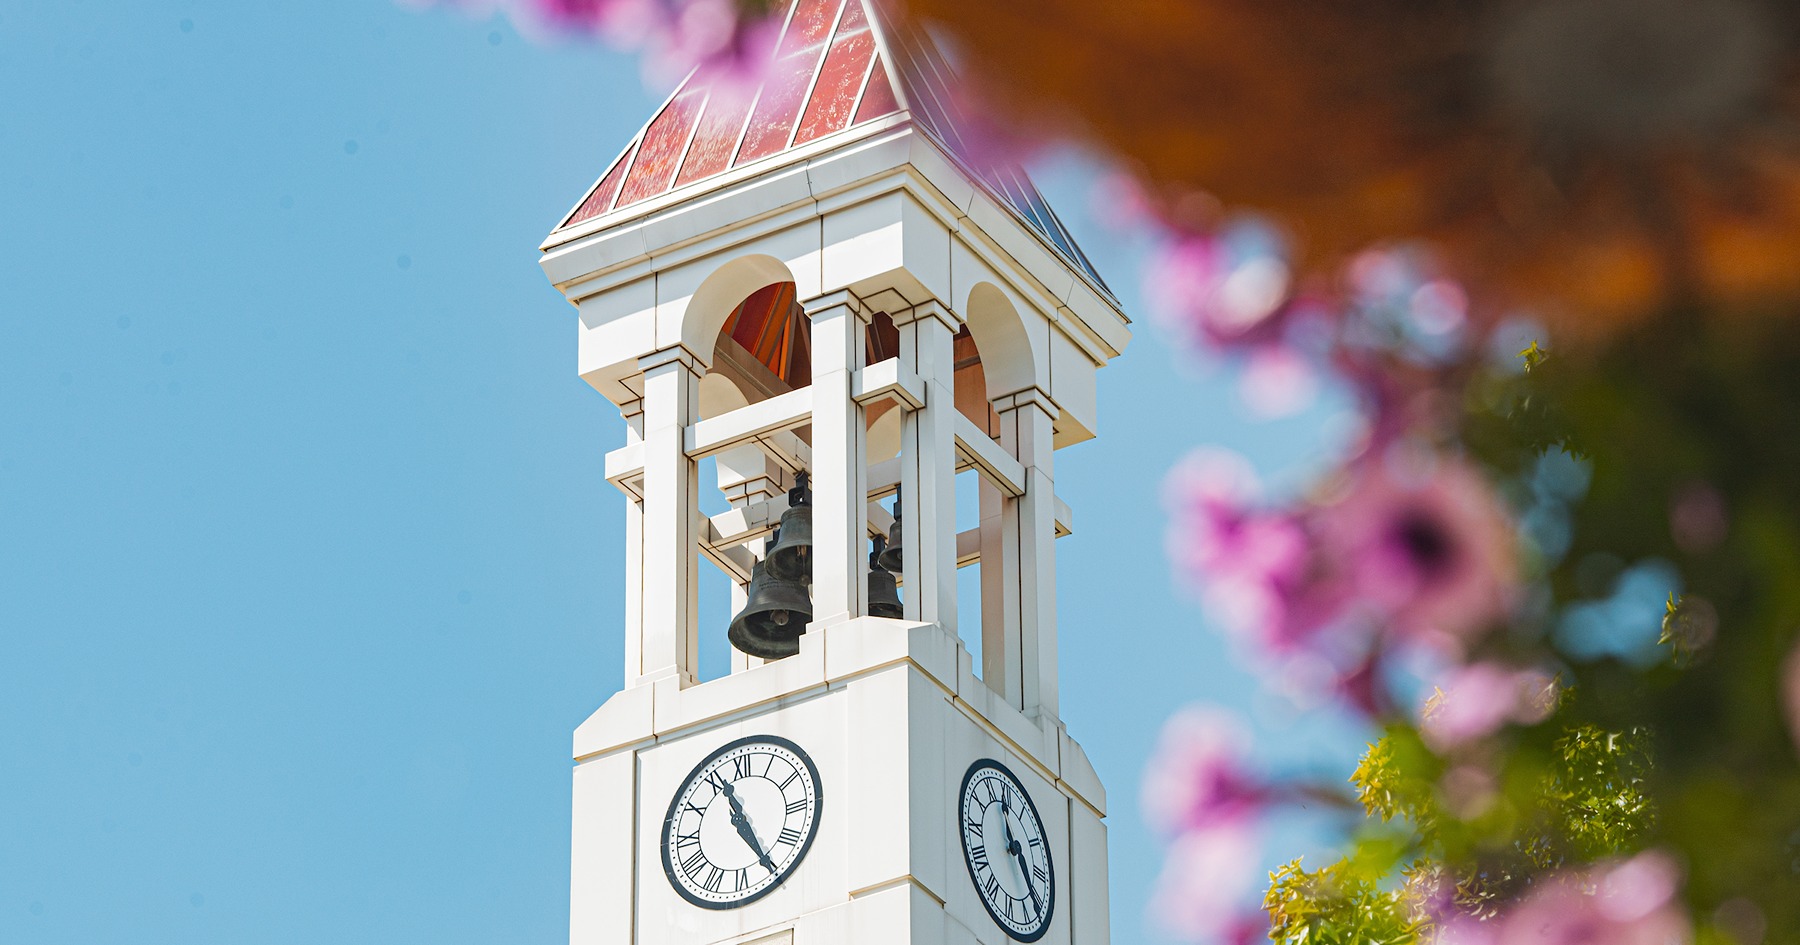 Purdue bell tower in the spring